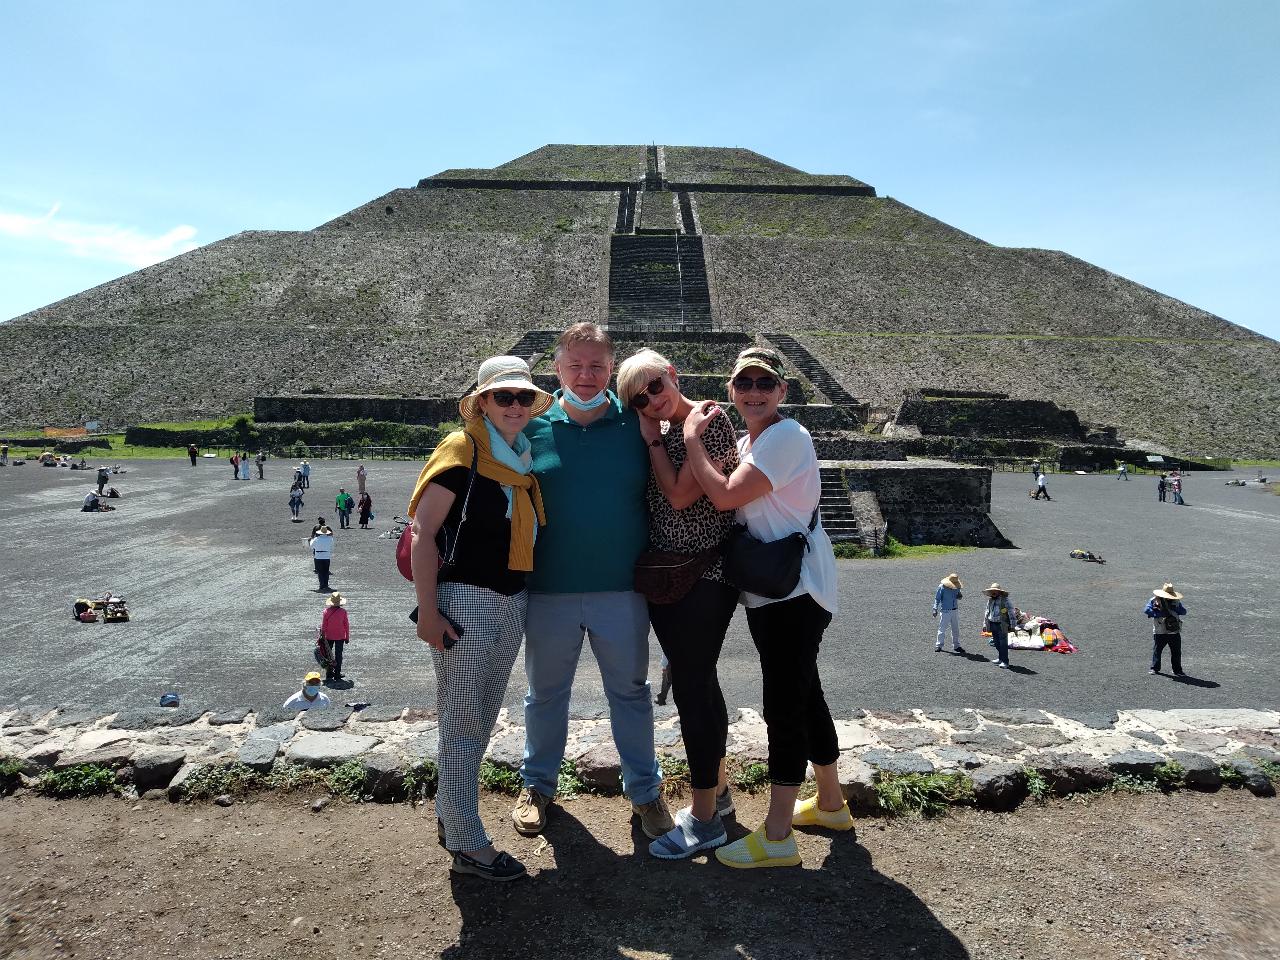 Teotihuacan Mexico City Tour: Admire World Famous Ruins and Explore Historic Center (Private / 9 h)